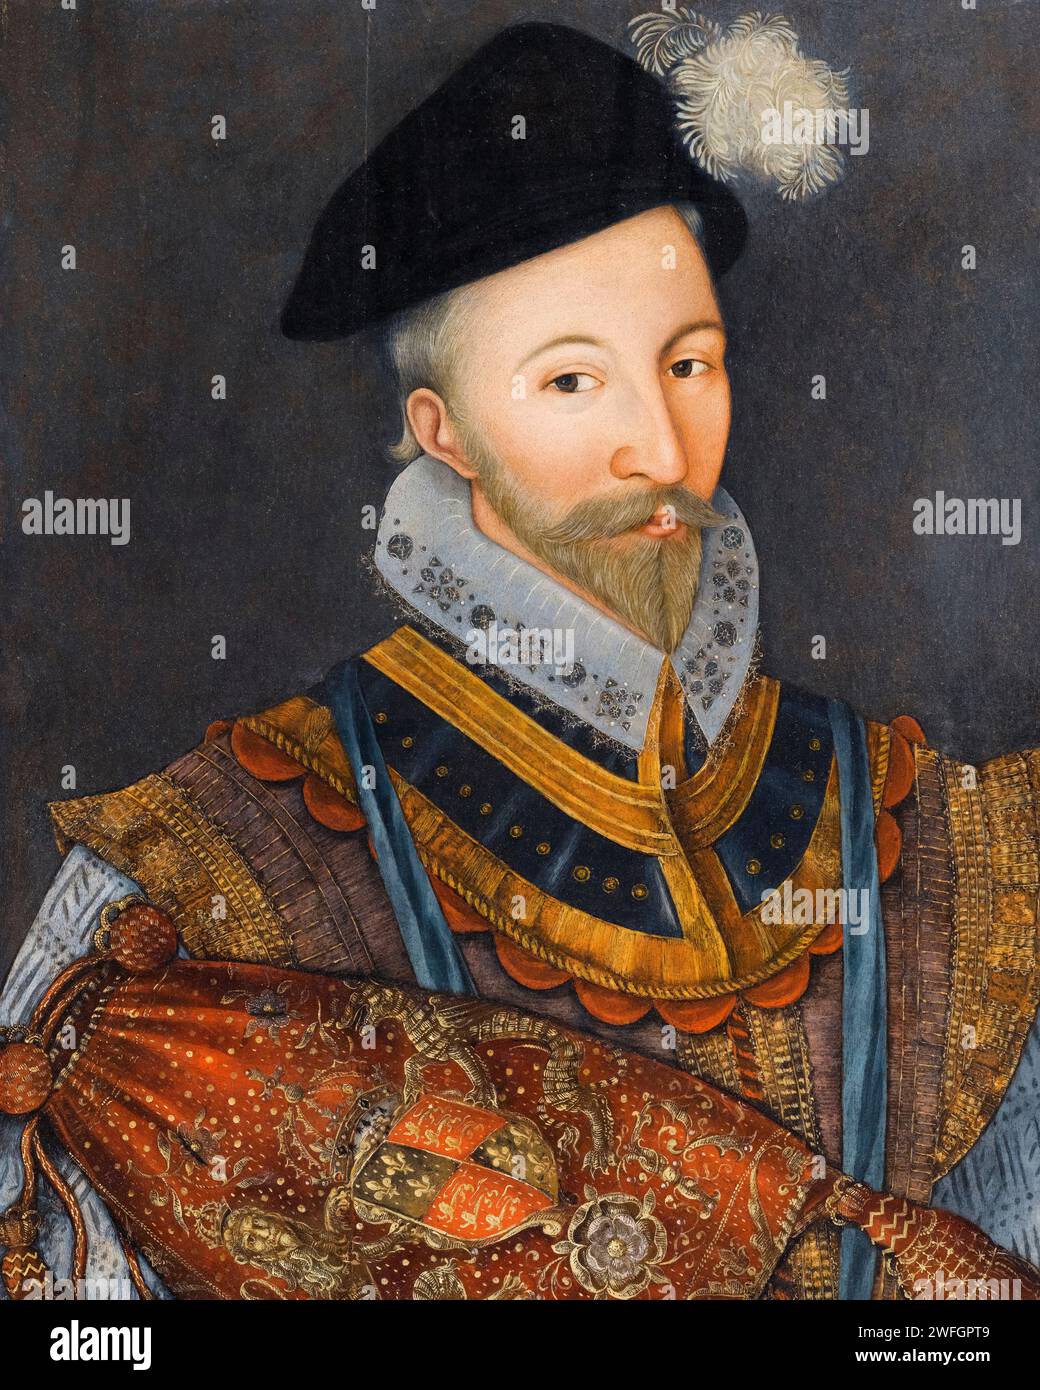 William Howard, 1st Baron Howard, The Lord Howard of Effingham (circa 1510-1573), English diplomat and military leader, portrait painting in oil on panel, 1530-1599 Stock Photo